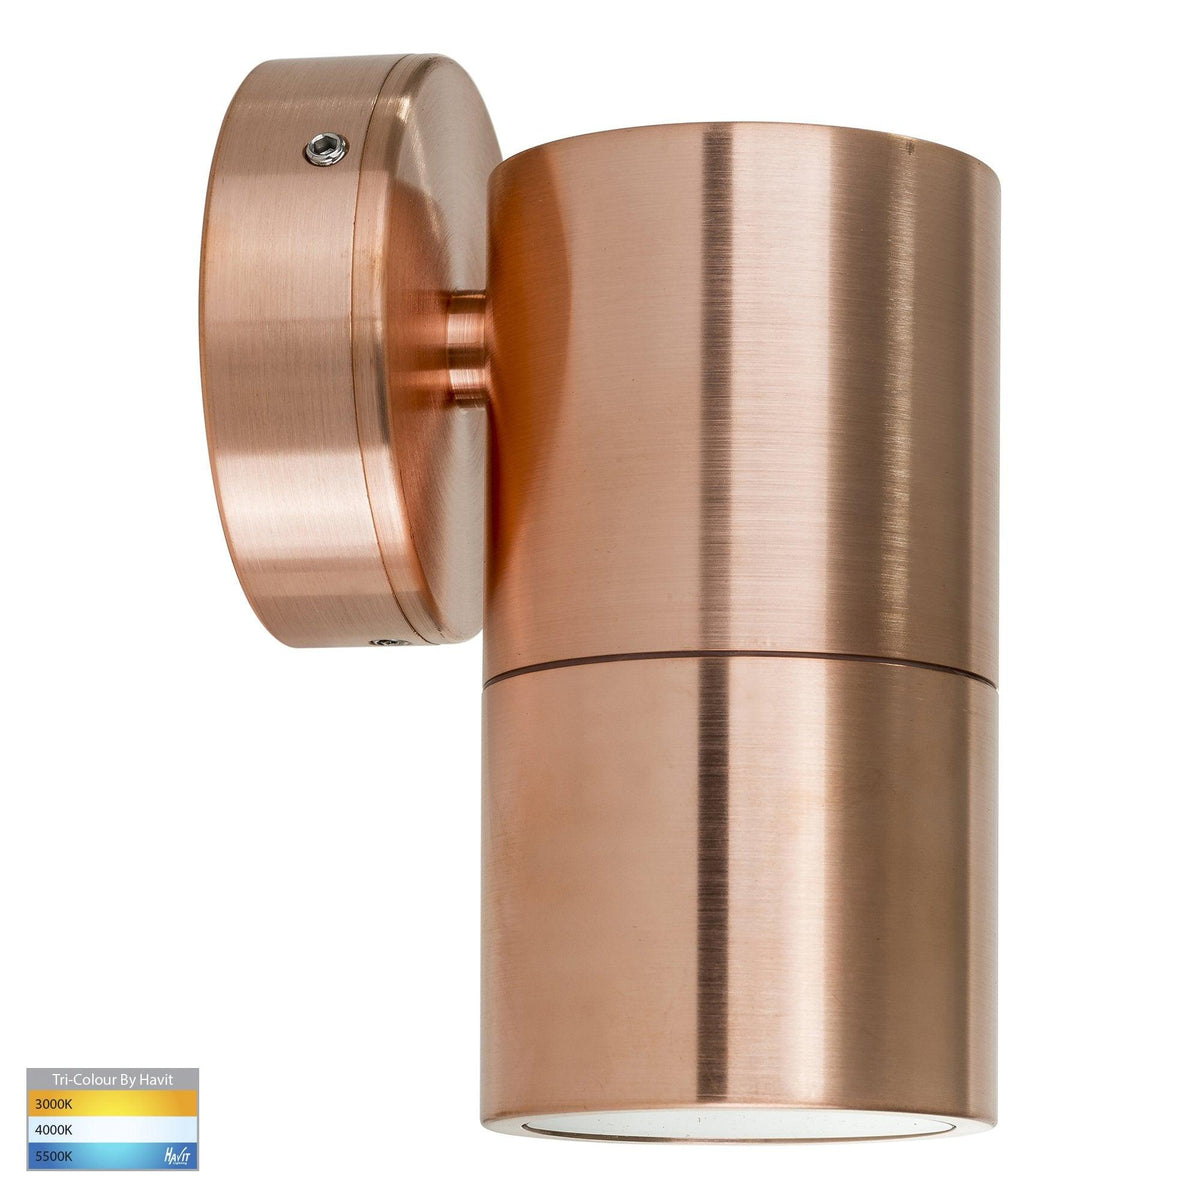 Havit Lighting Wall Lights HV1115T / Copper Tivah Solid Copper TRI Colour Fixed Down Lights-For-You HV1115T